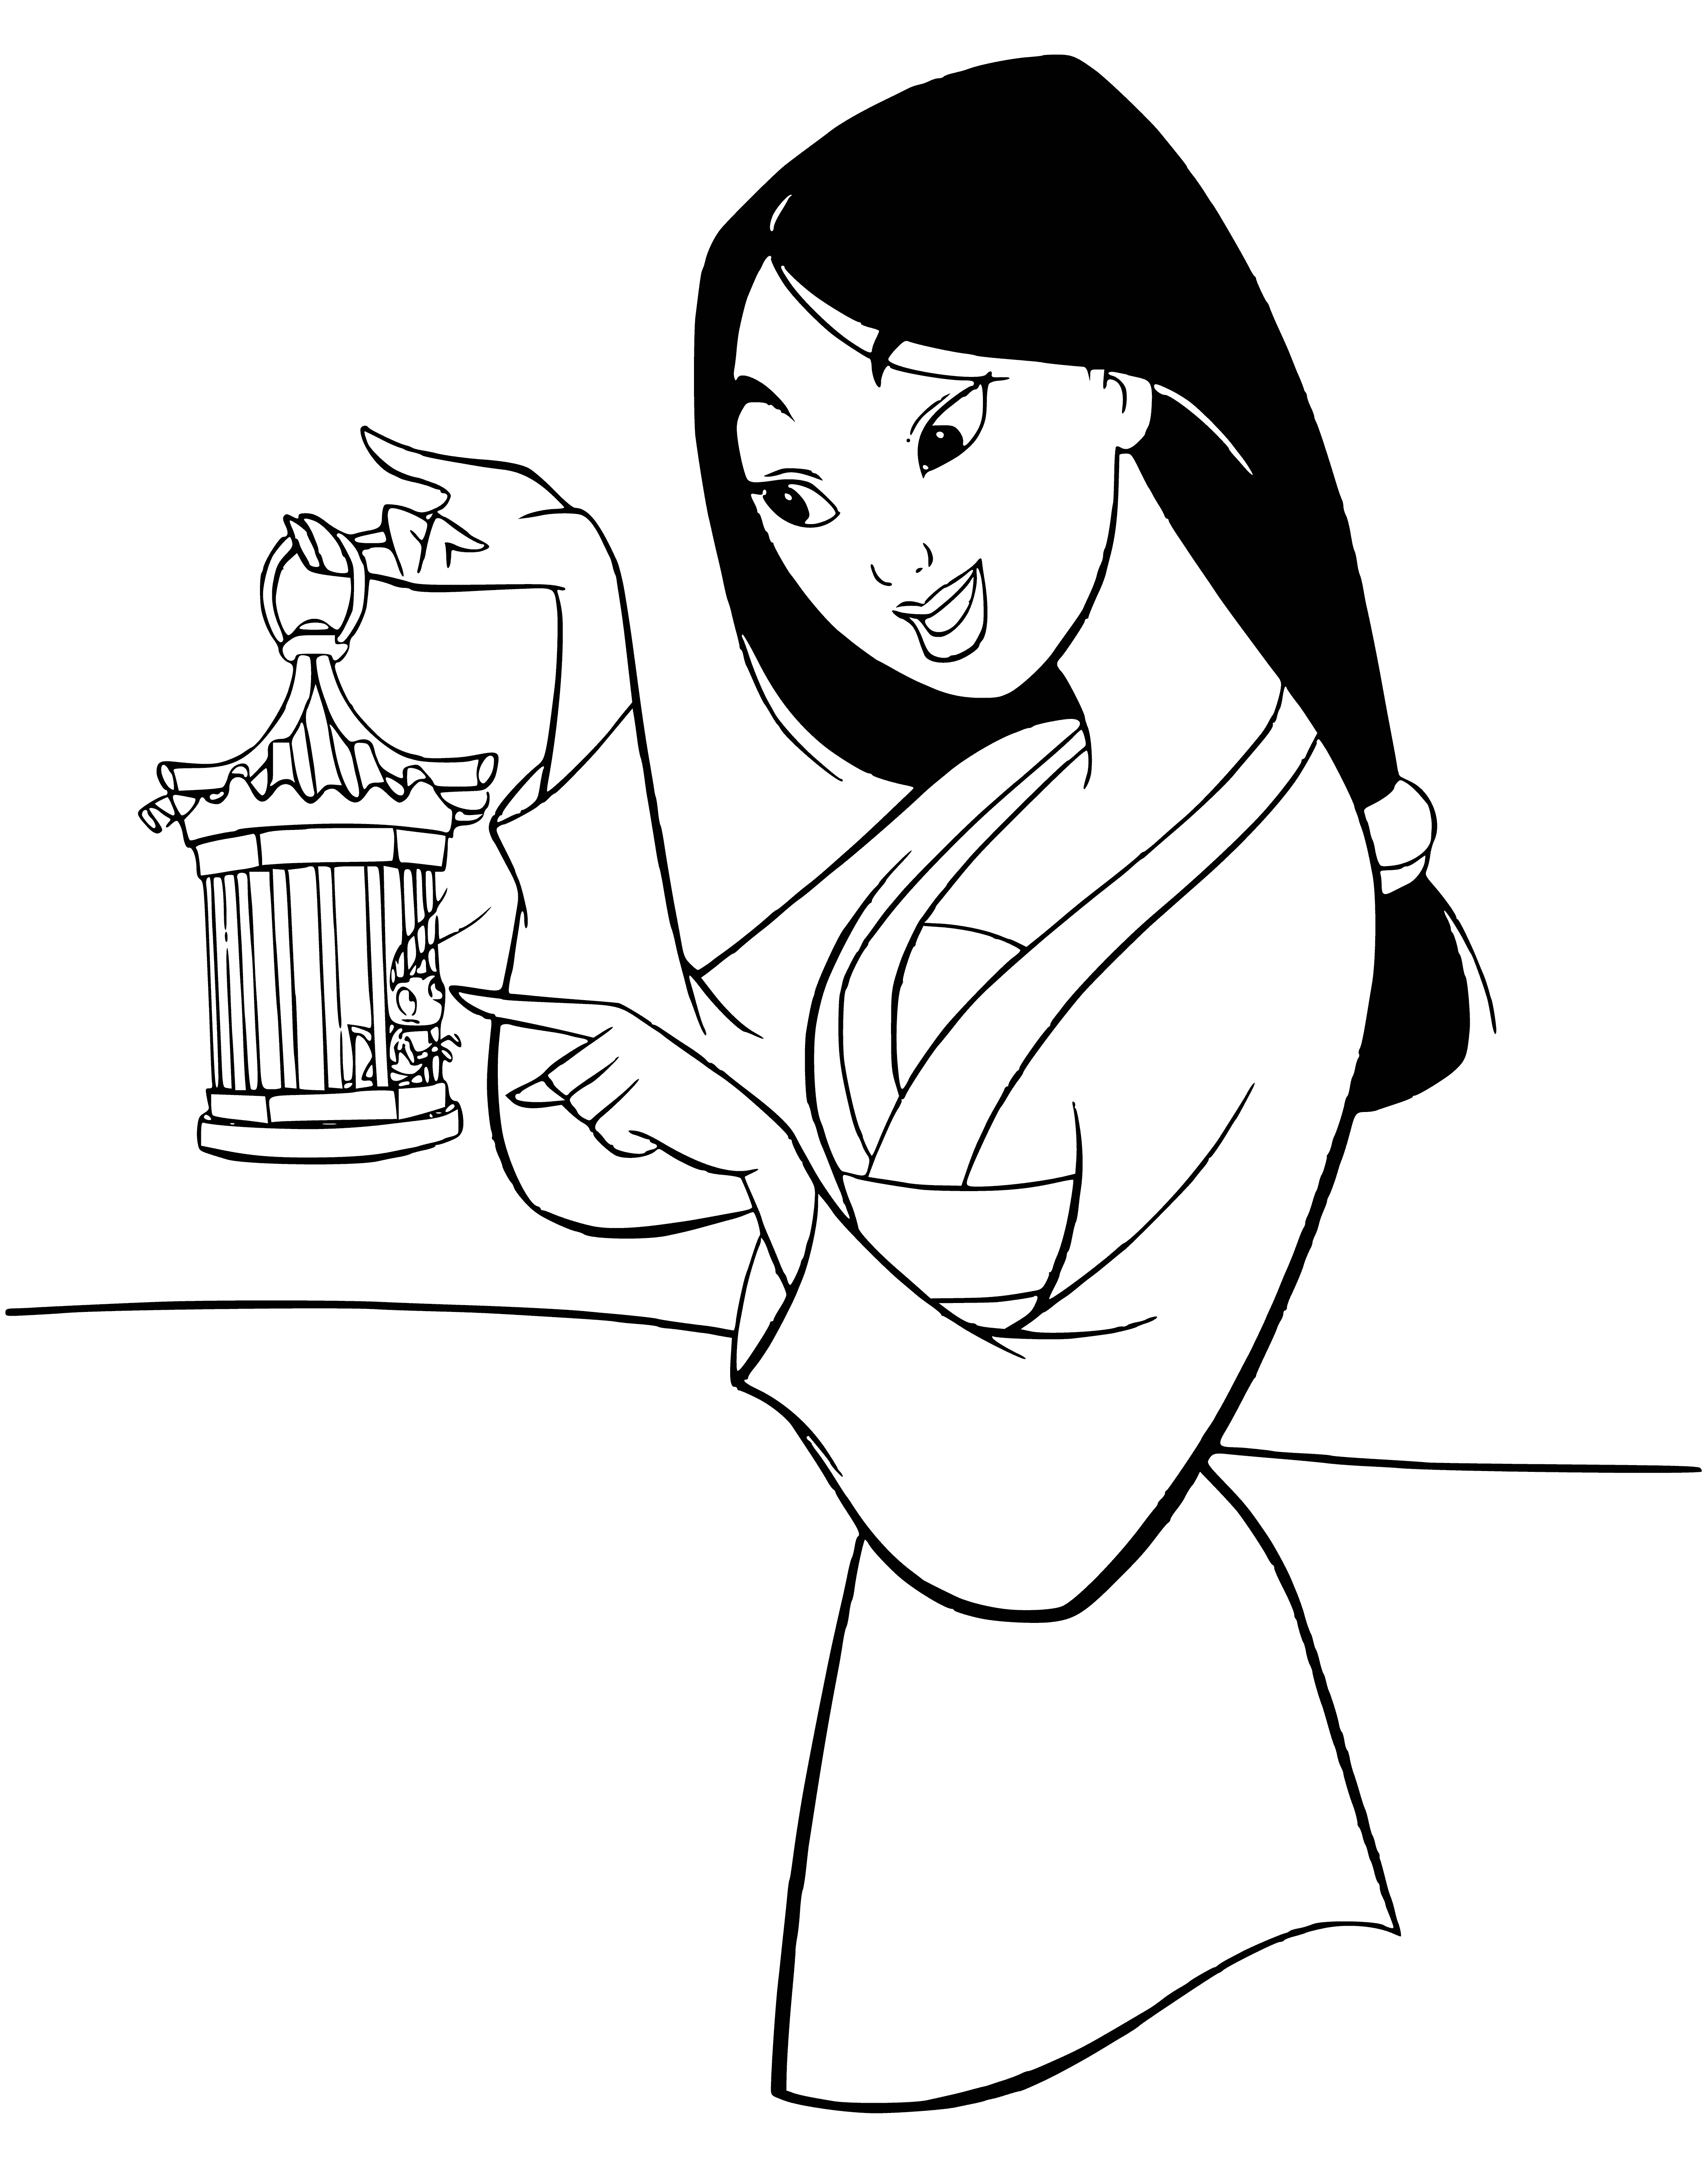 coloring page: Mulan, a Chinese folk heroine, disguises as a man to fight in her father's stead. She stands in her battle armor, ready for the fight.